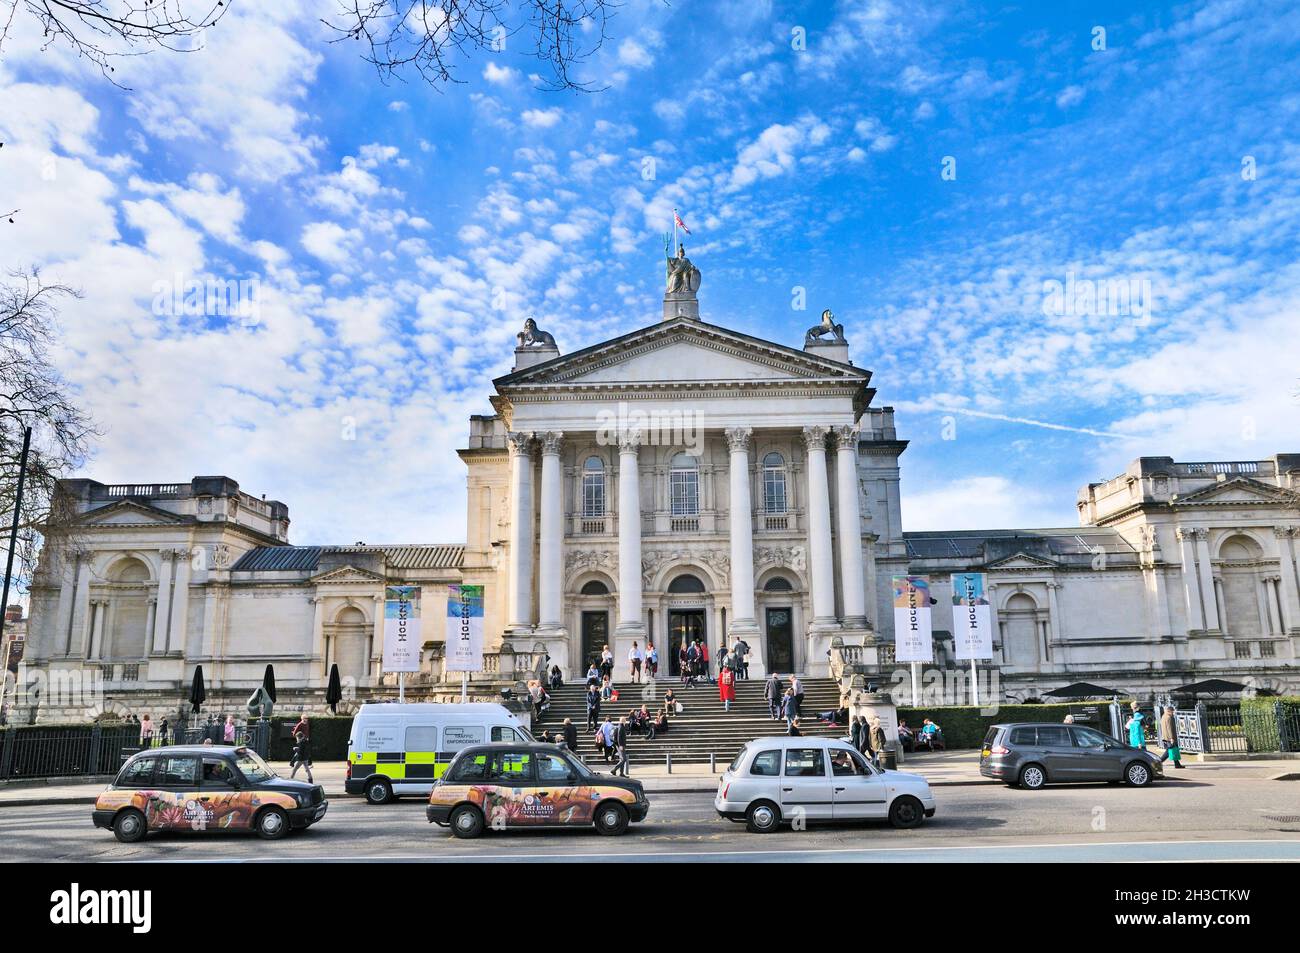 Tate Britain Art Gallery Museum on Millbank, City of Westminster, Londres, Angleterre, Royaume-Uni. Banque D'Images